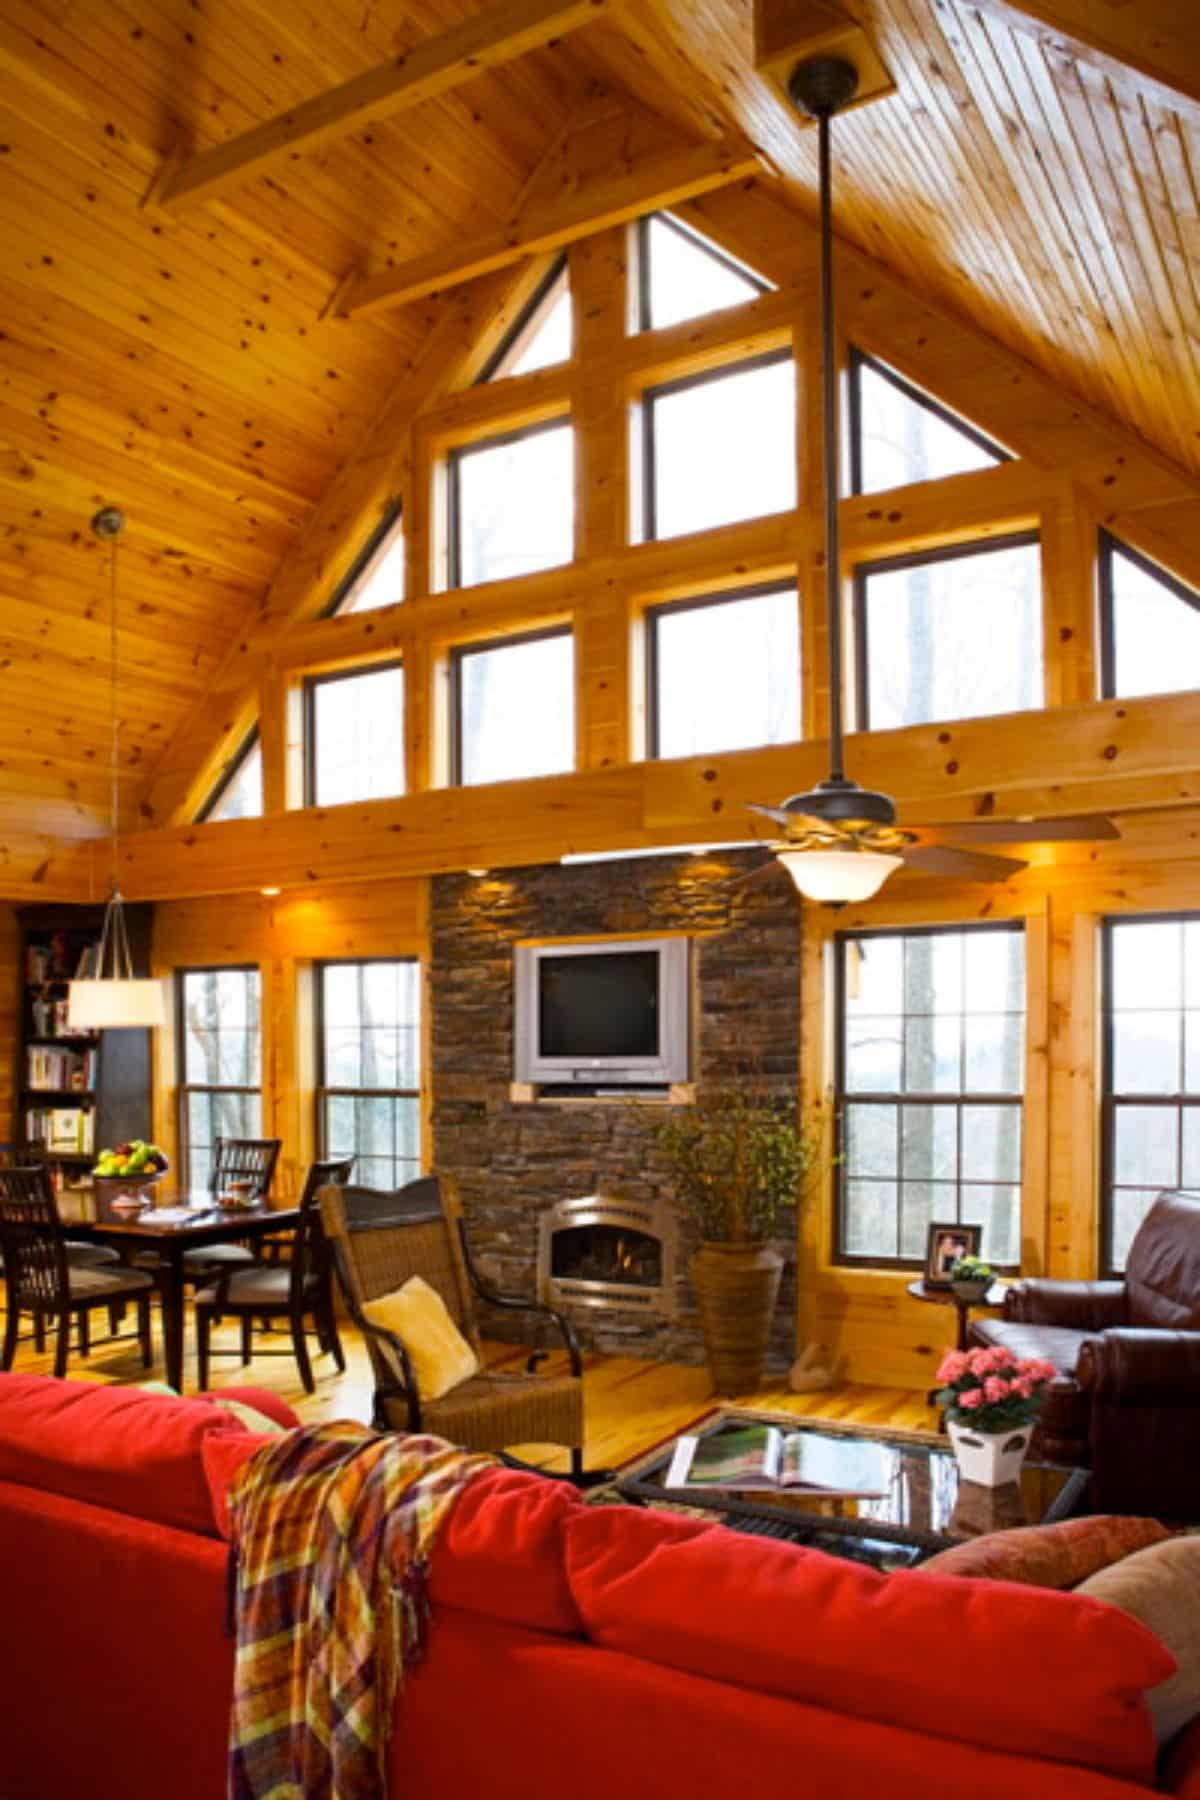 wall of windows with stone fireplace in center